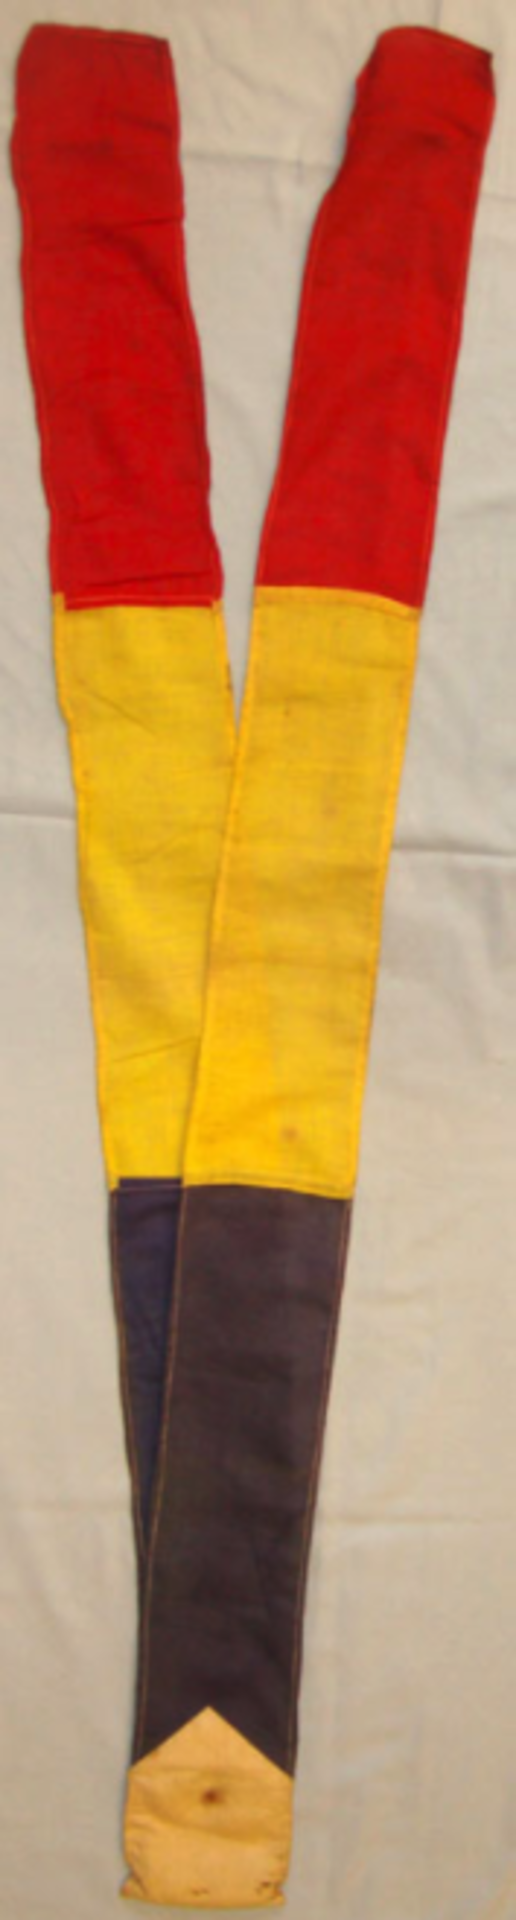 Original, WW1 Era Royal Flying Corps (RFC) 2 Tail Message Streamer With Message - Image 4 of 6